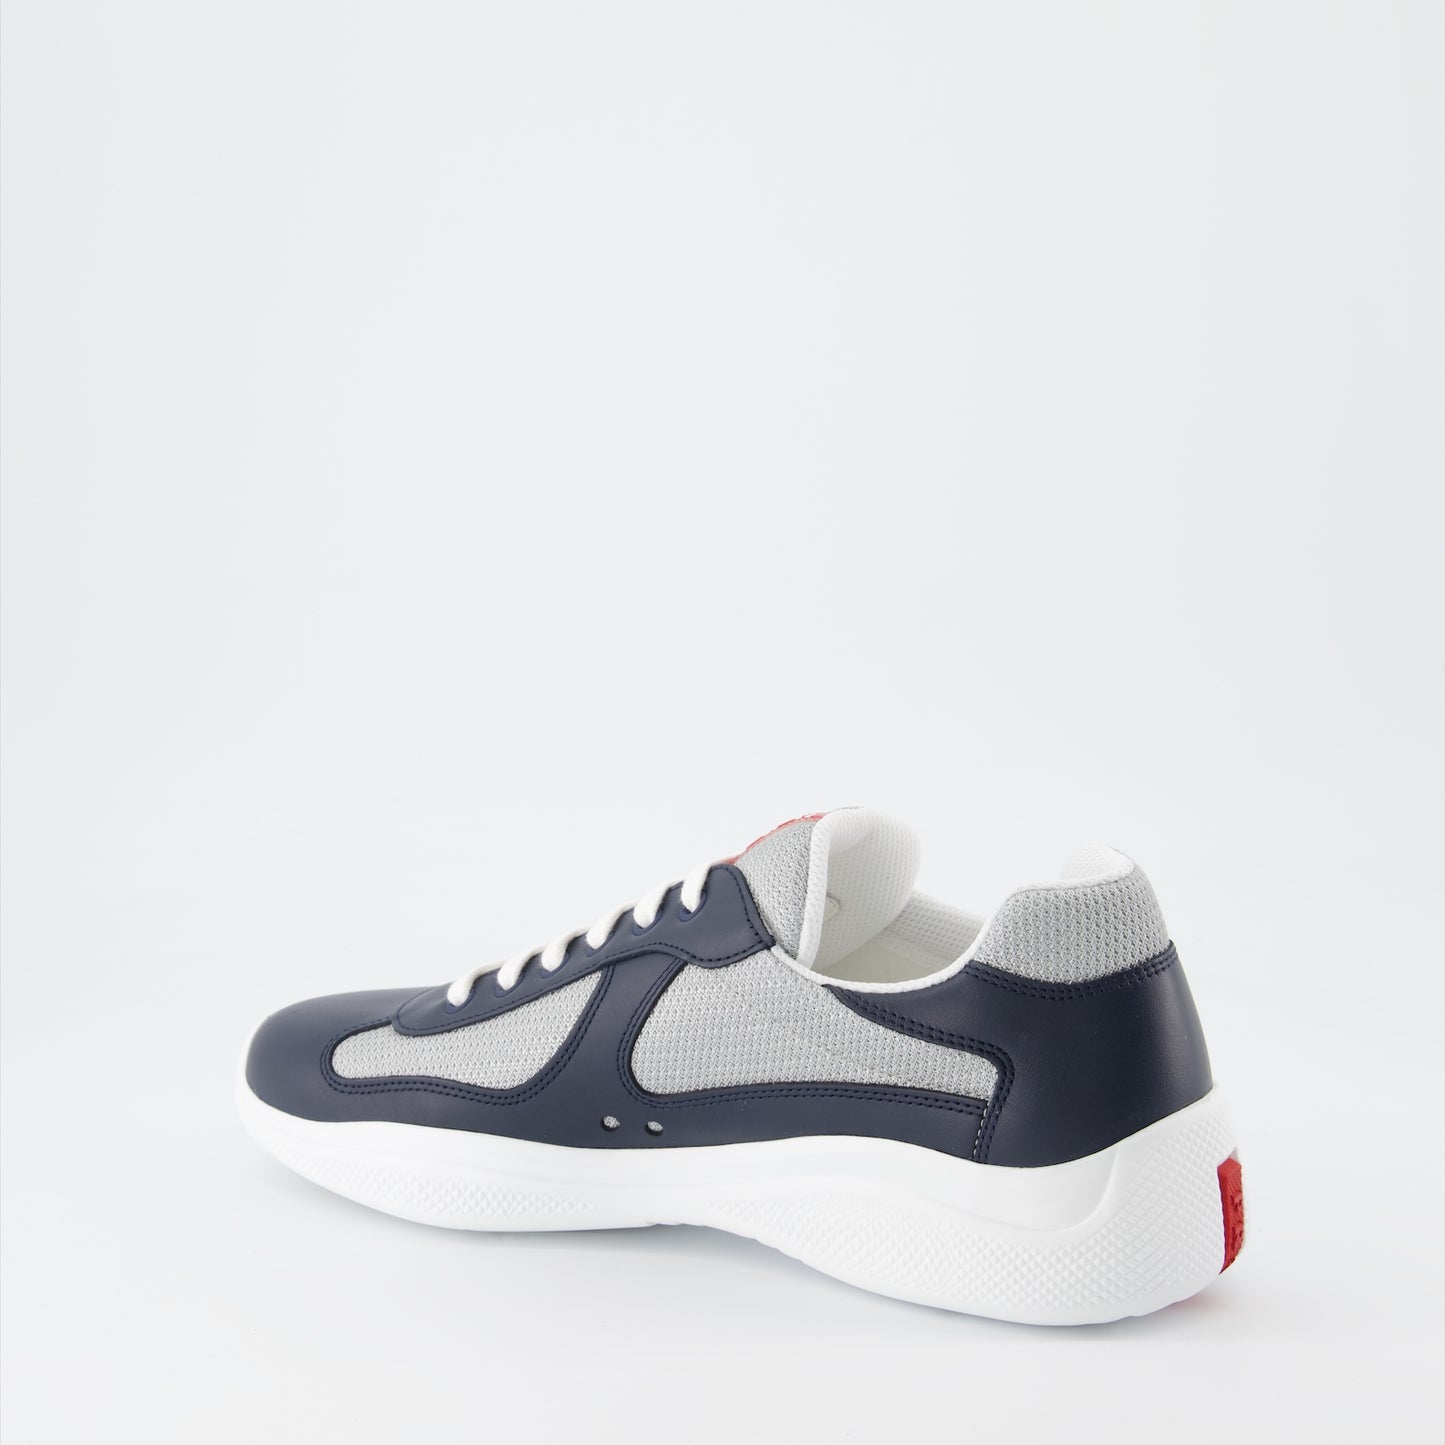 America's Cup sneakers